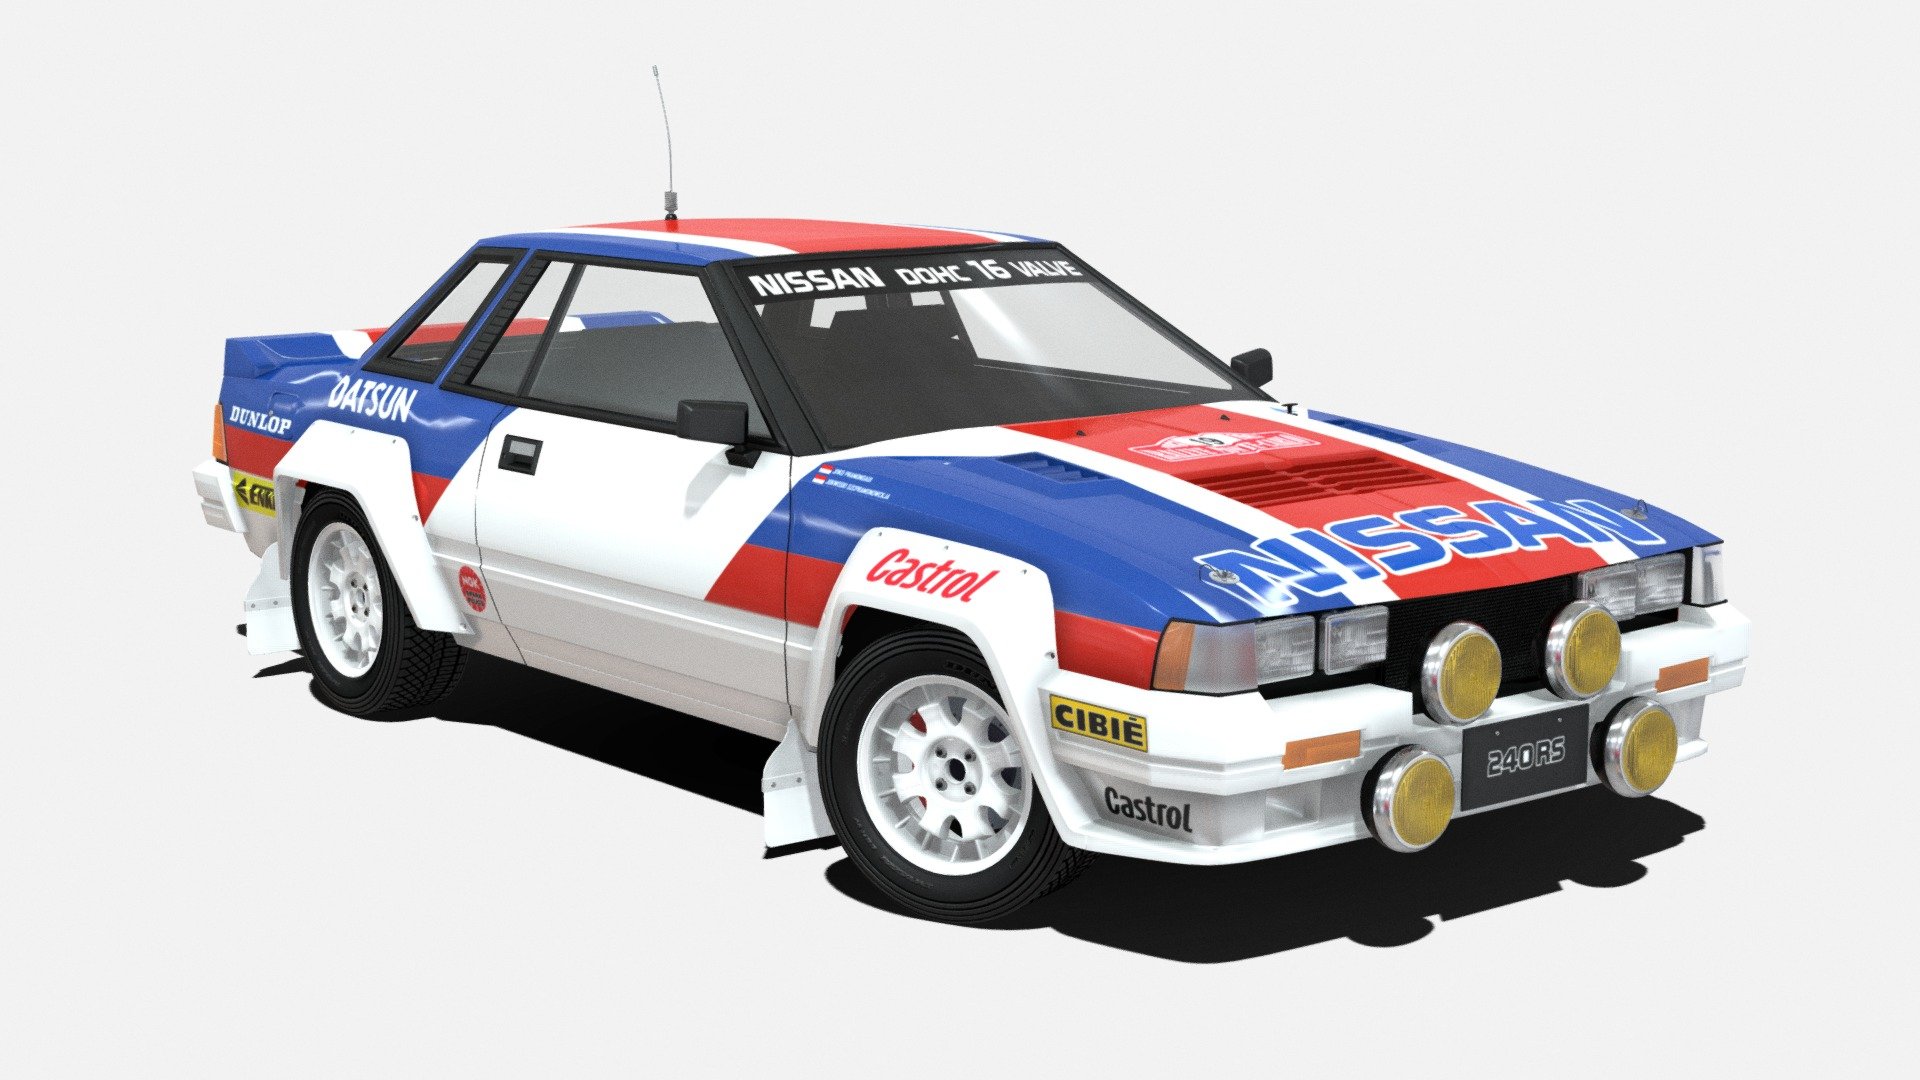 This is a 3D model of Nissan 240RS Group B Rally car I made in Blender.
This car is based on S110 model of the Silvia family. However, since the car was heavily modified, Nissan had to make 250 homologated models to fulfill the regulation to enter Group B. Unfortunately, Group B has already been ended before this car could compete.

Reworked at May 13th, 2022. Mostly the reworks are UV Map for body &amp; windows and shaders/materials so that it will be compatible with Blender Cycles engine. Previously it was specific for EEVEE and caused black areas when rendered with Blender Cycles. Here are some renders :





UV Templates :

 - Nissan 240RS (Group B) - Buy Royalty Free 3D model by Joko_P 3d model